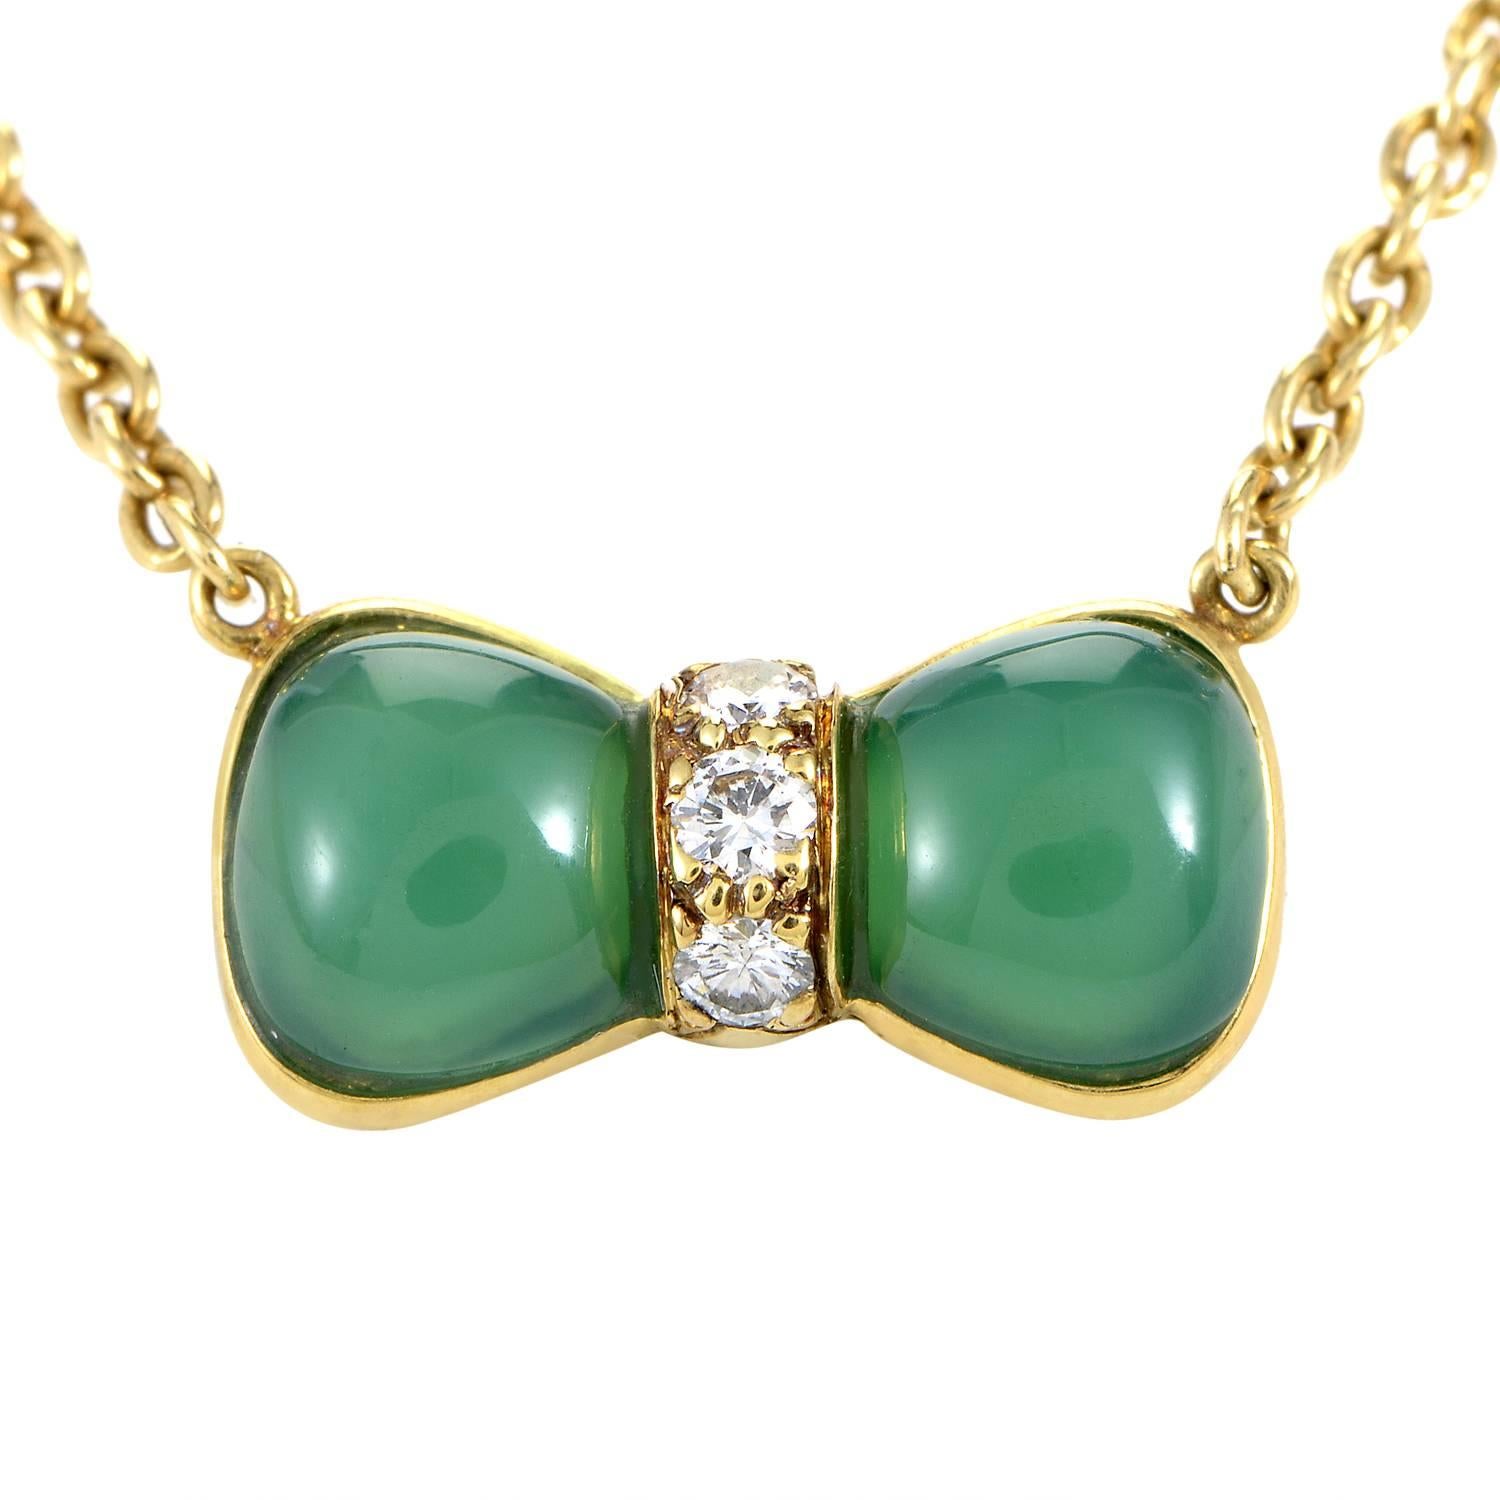 This adorable pendant necklace from Van Cleef & Arpels is absolutely delightful! The necklace is made of 18K yellow gold, and features a bow-shaped pendant set with .15ct of diamonds and gorgeous green jade.
Pendant Dimensions: 0.63 x